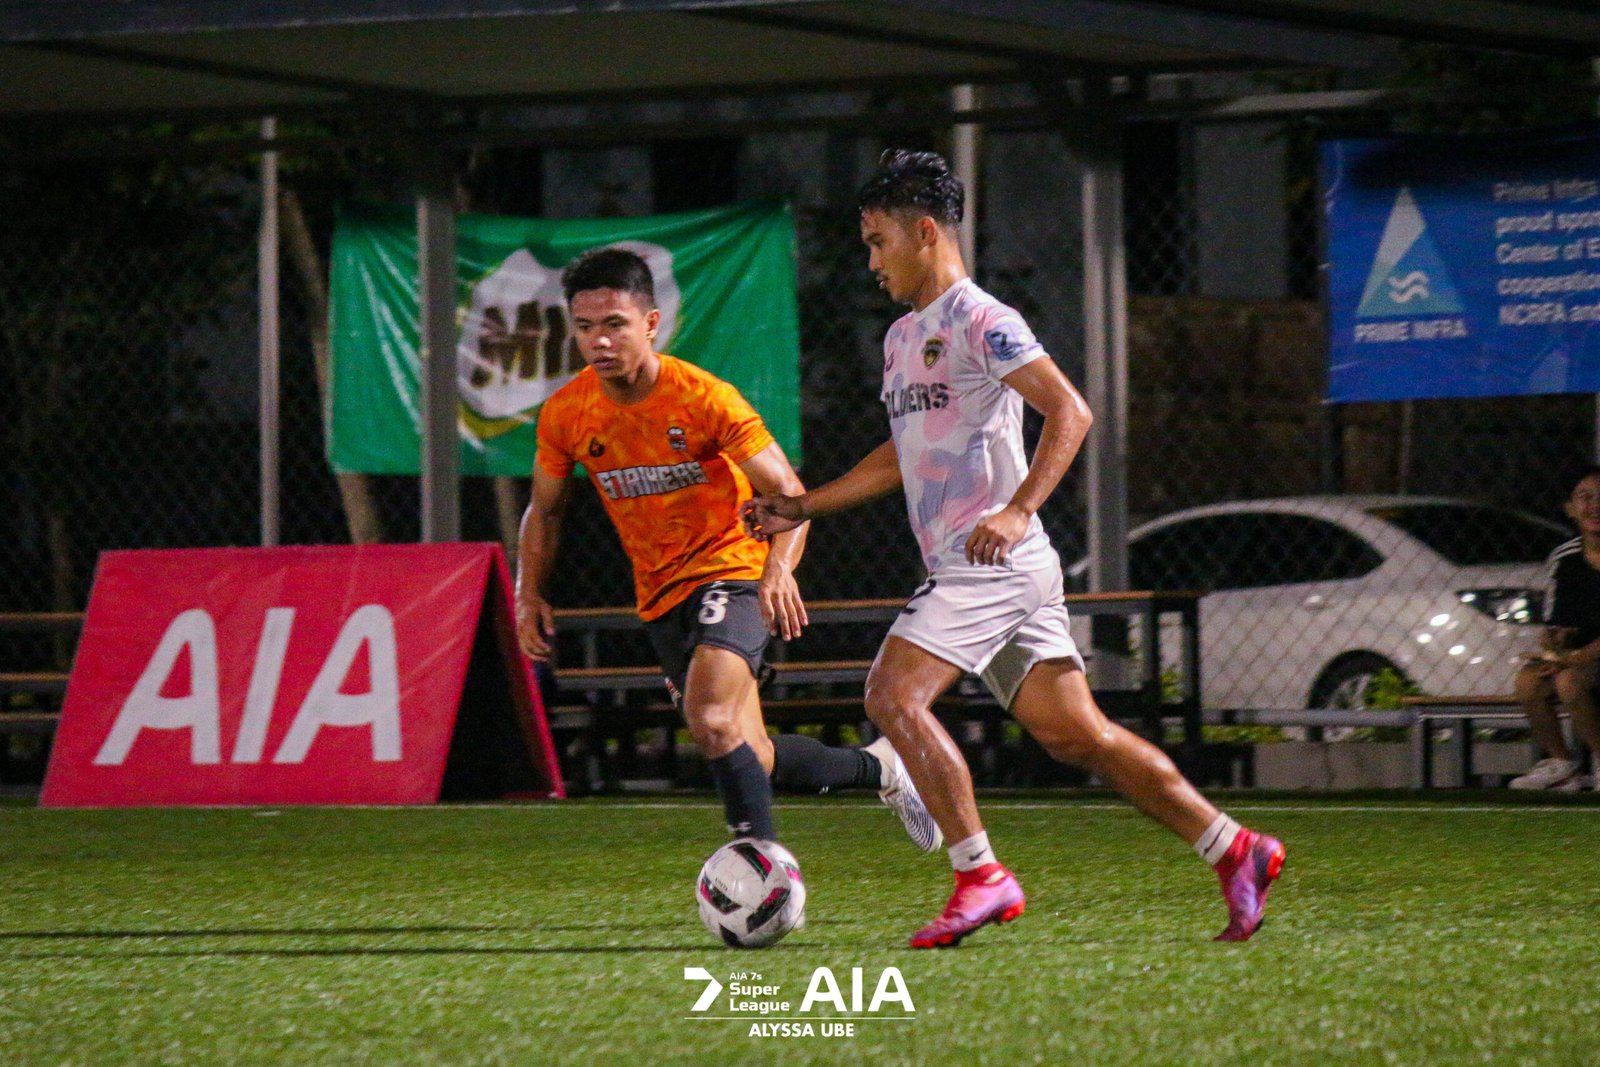 The Pampanga Strikers go for win no. 6 this Sunday, June 9, when they face the Alabang South Supers at the Atleta63 football field in Bridgetown, Pasic. [AIA 7s photo]